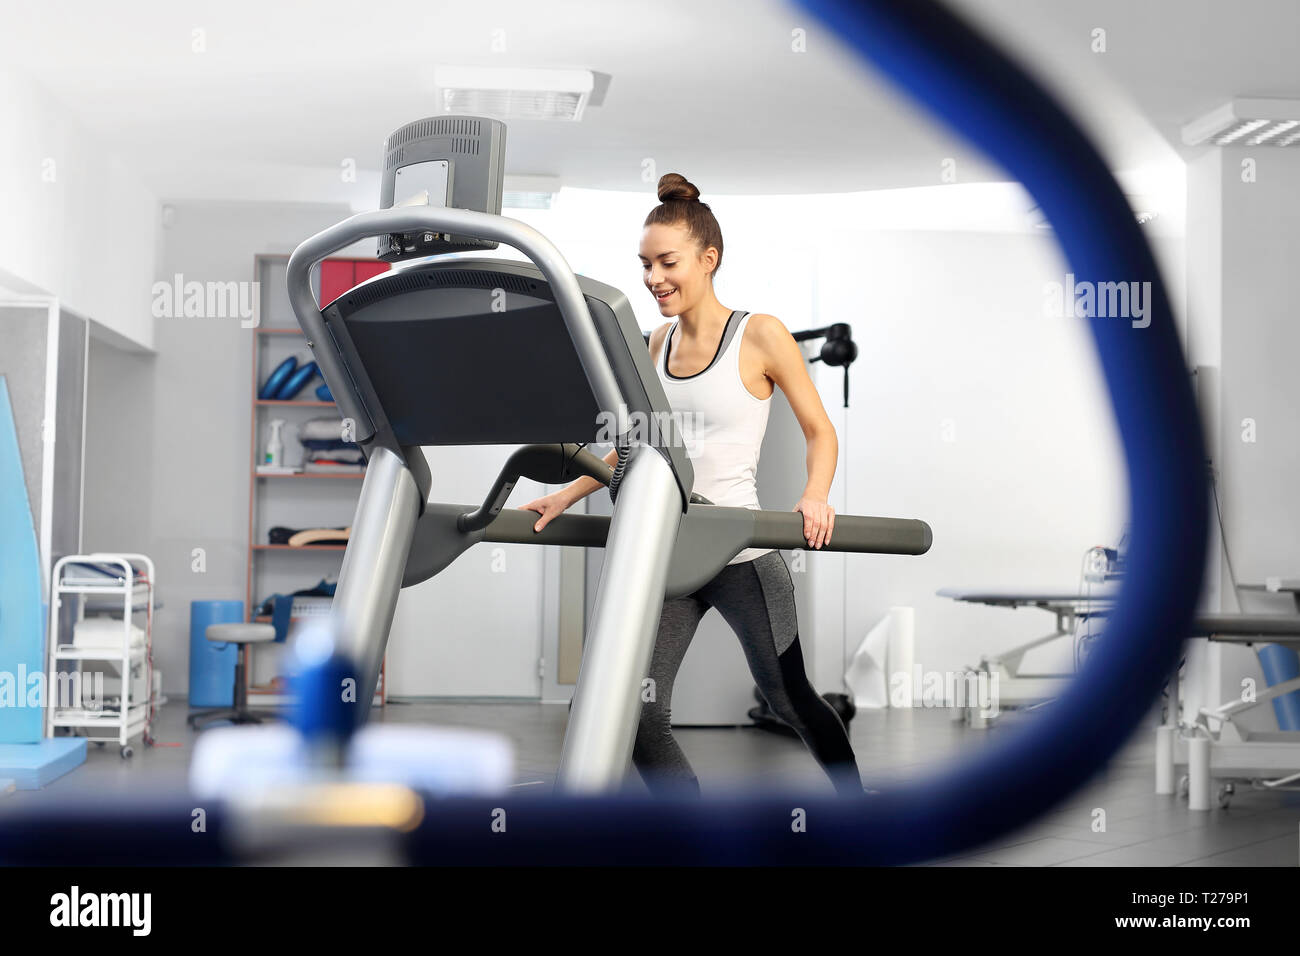 A young woman in an exercise room is running on an automatic treadmill. Stock Photo